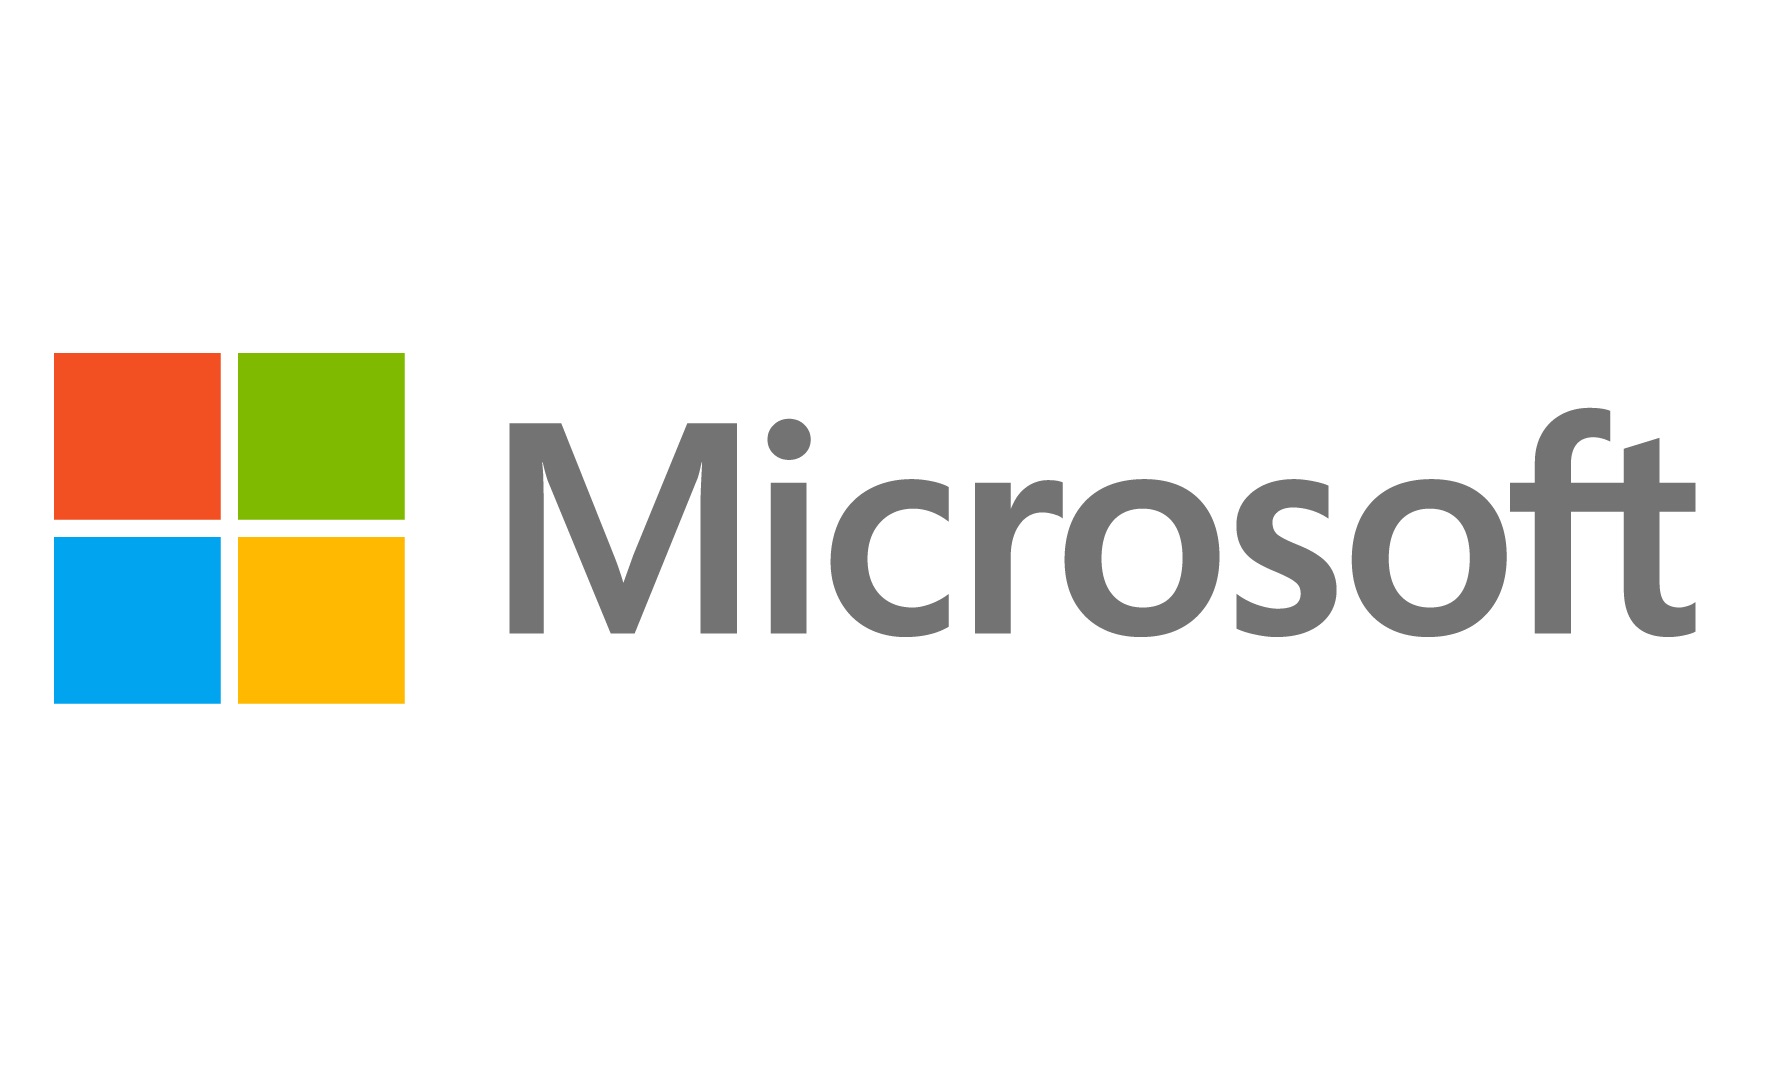 Microsoft Exceeds $500 Billion Market Value For The First Time in 17 Years